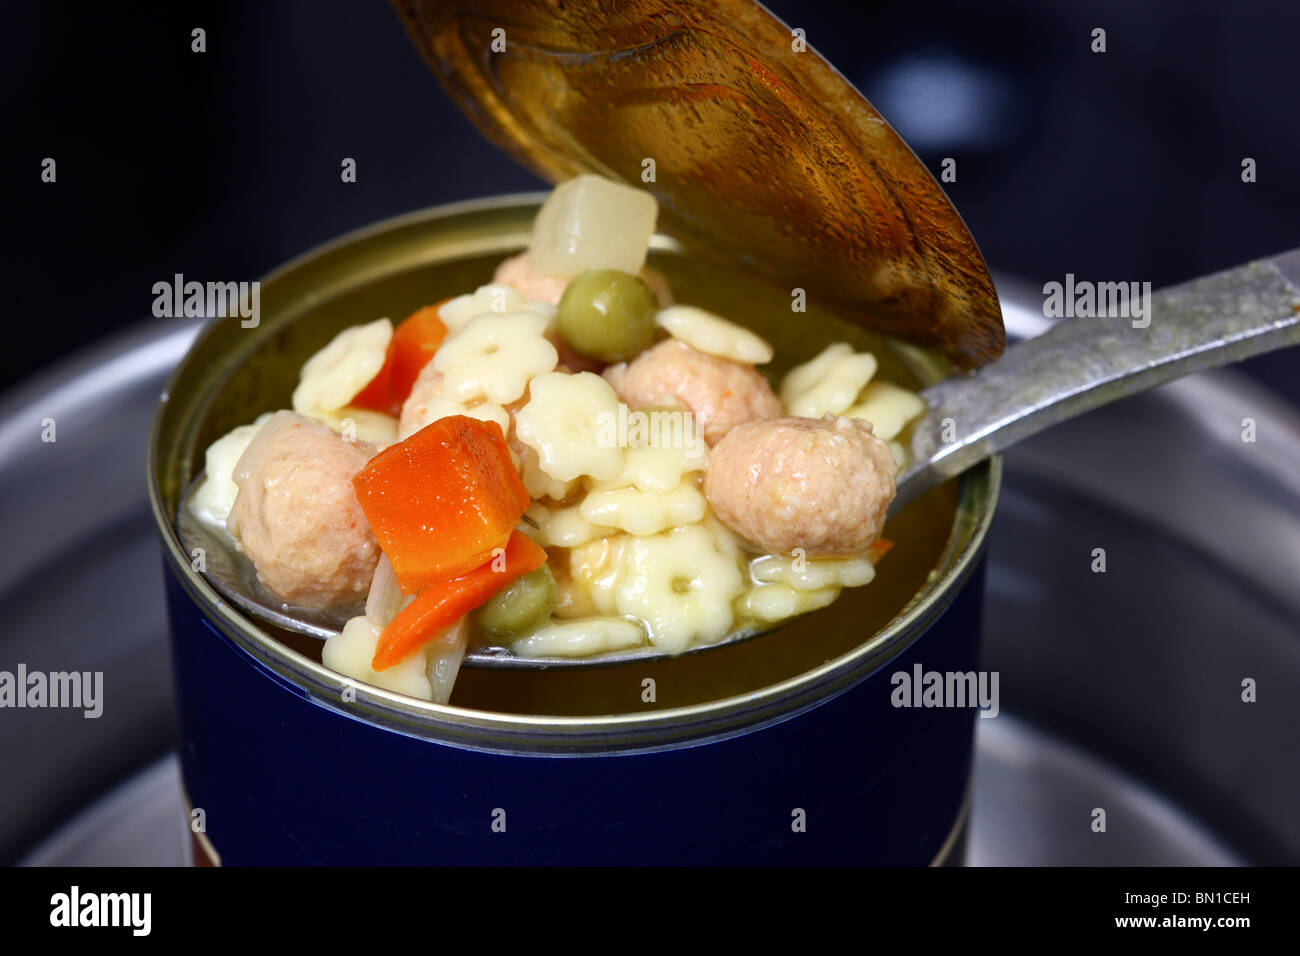 Heating of ready-to-serve meals in hot water. Soups or pasta dishes in cans. Convenience food products. Stock Photo